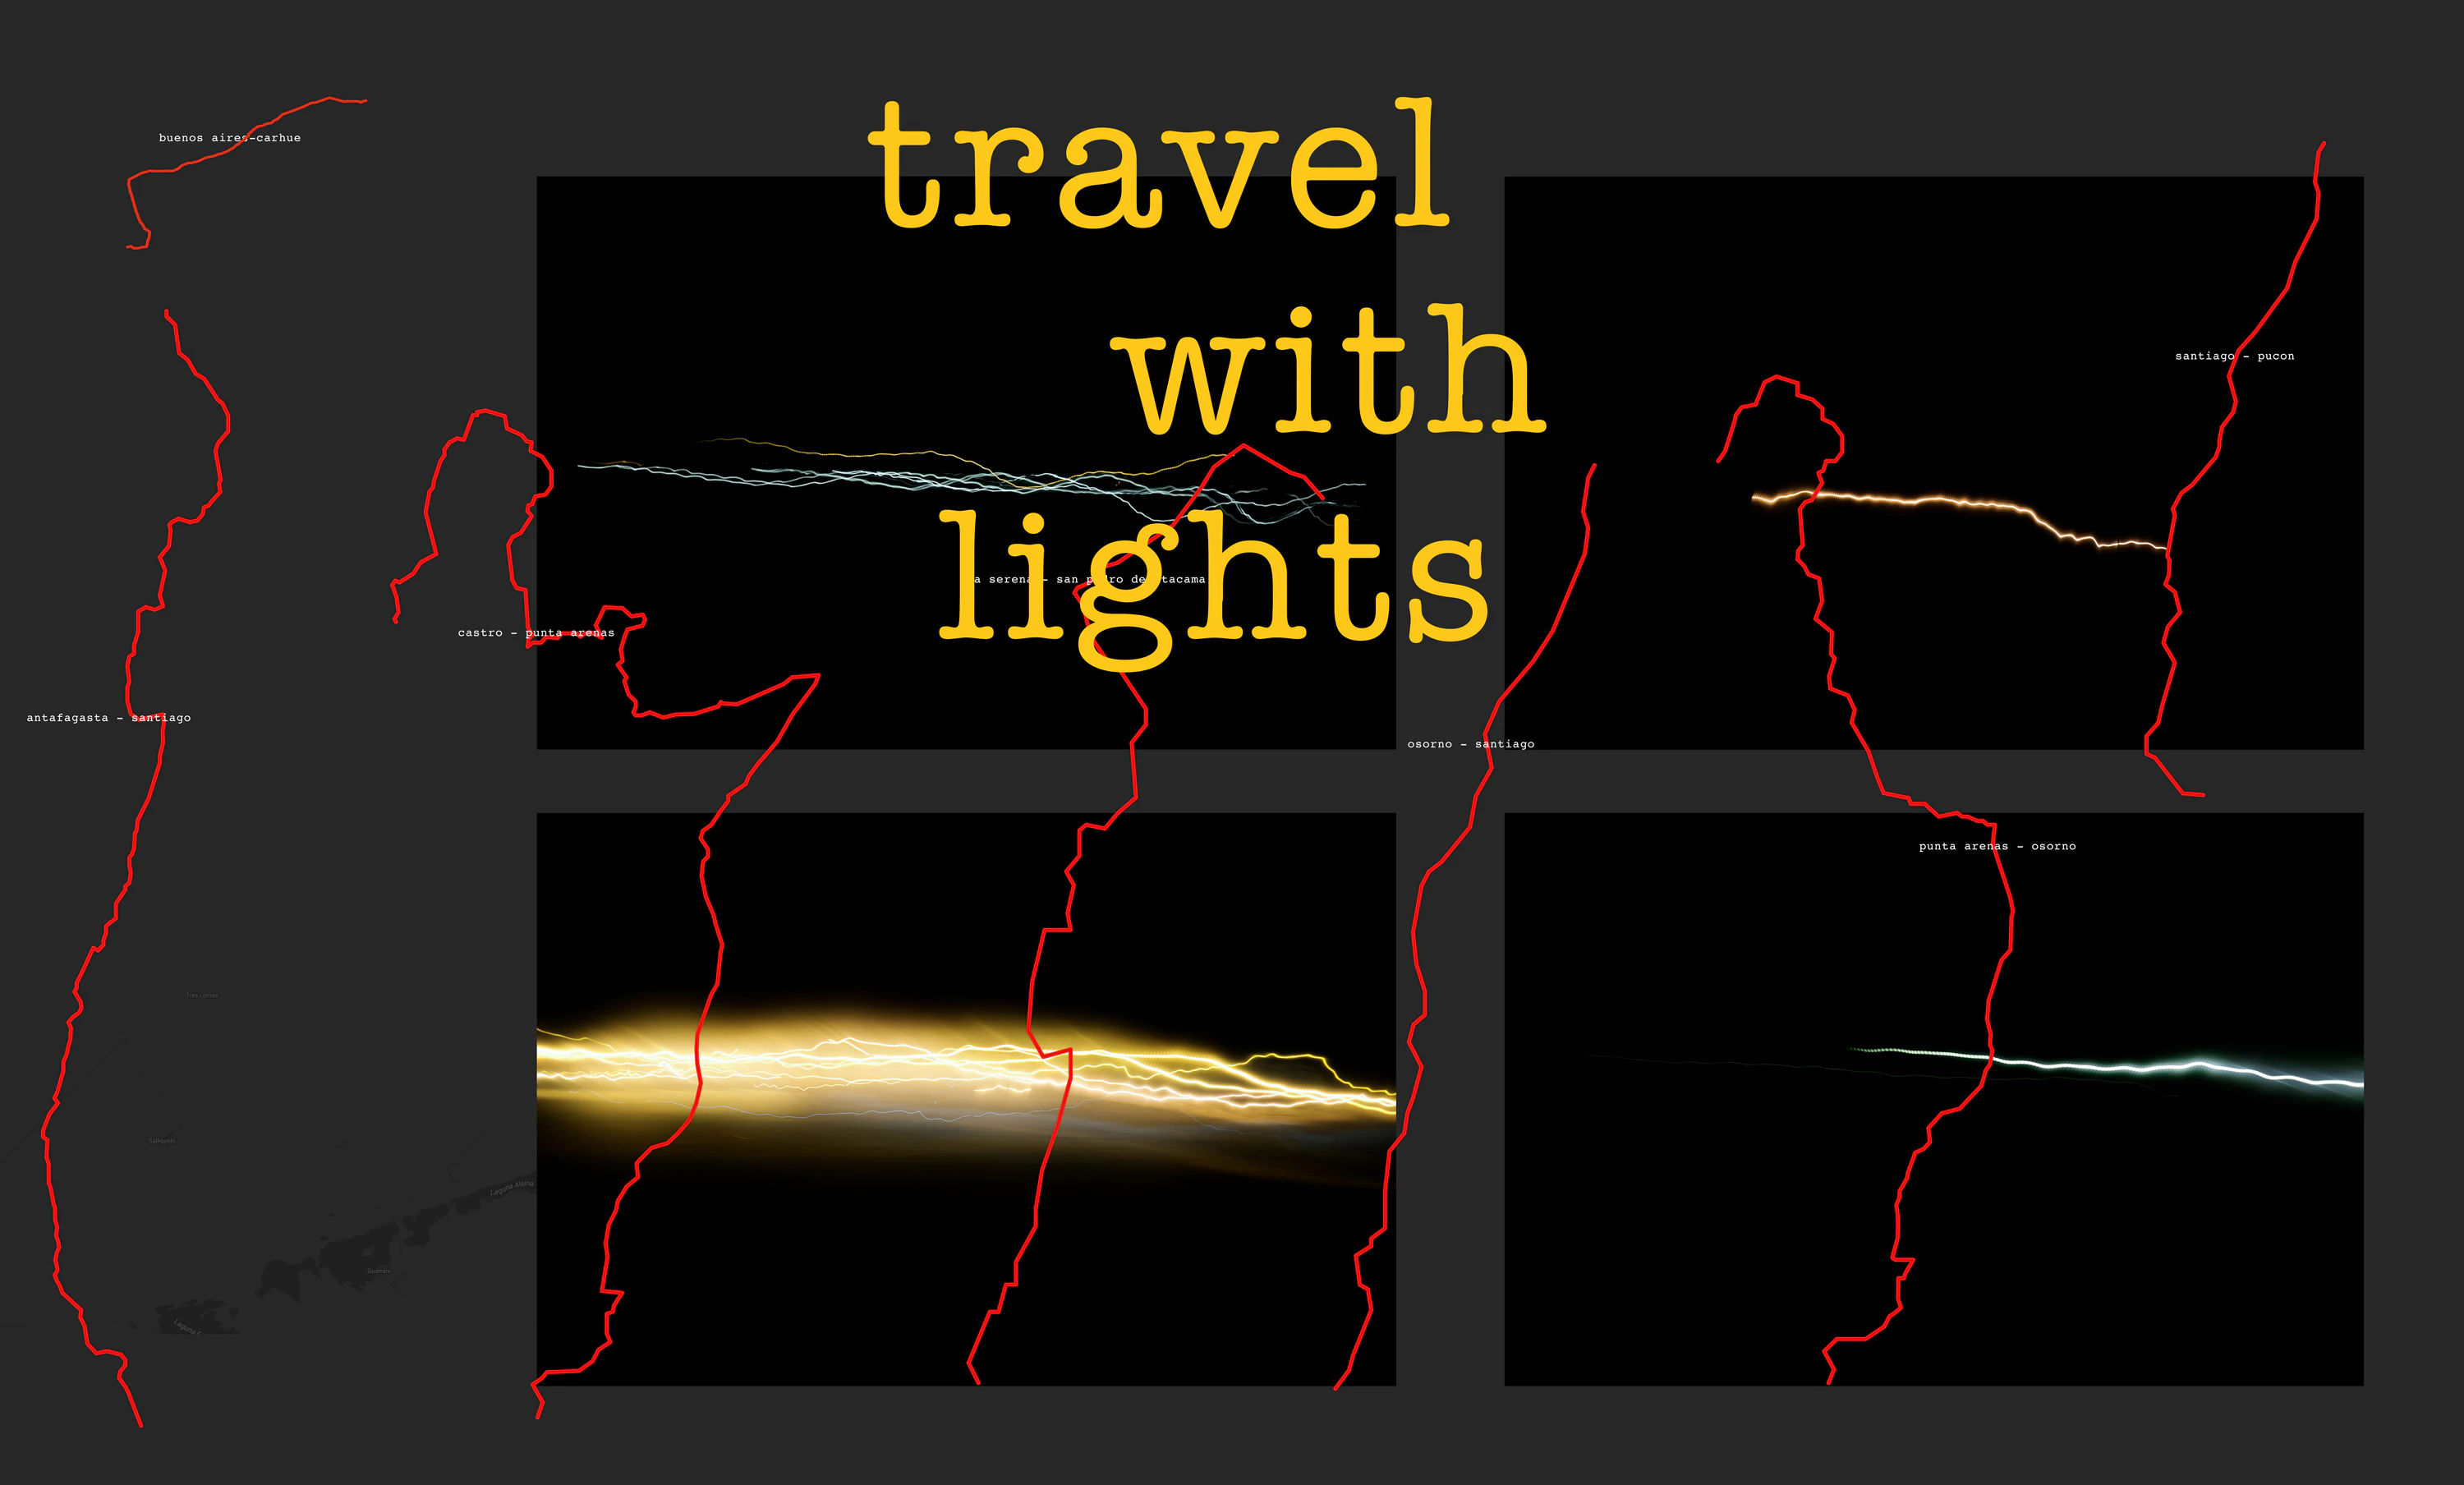 Travel with Lights  —  an audio-visual story